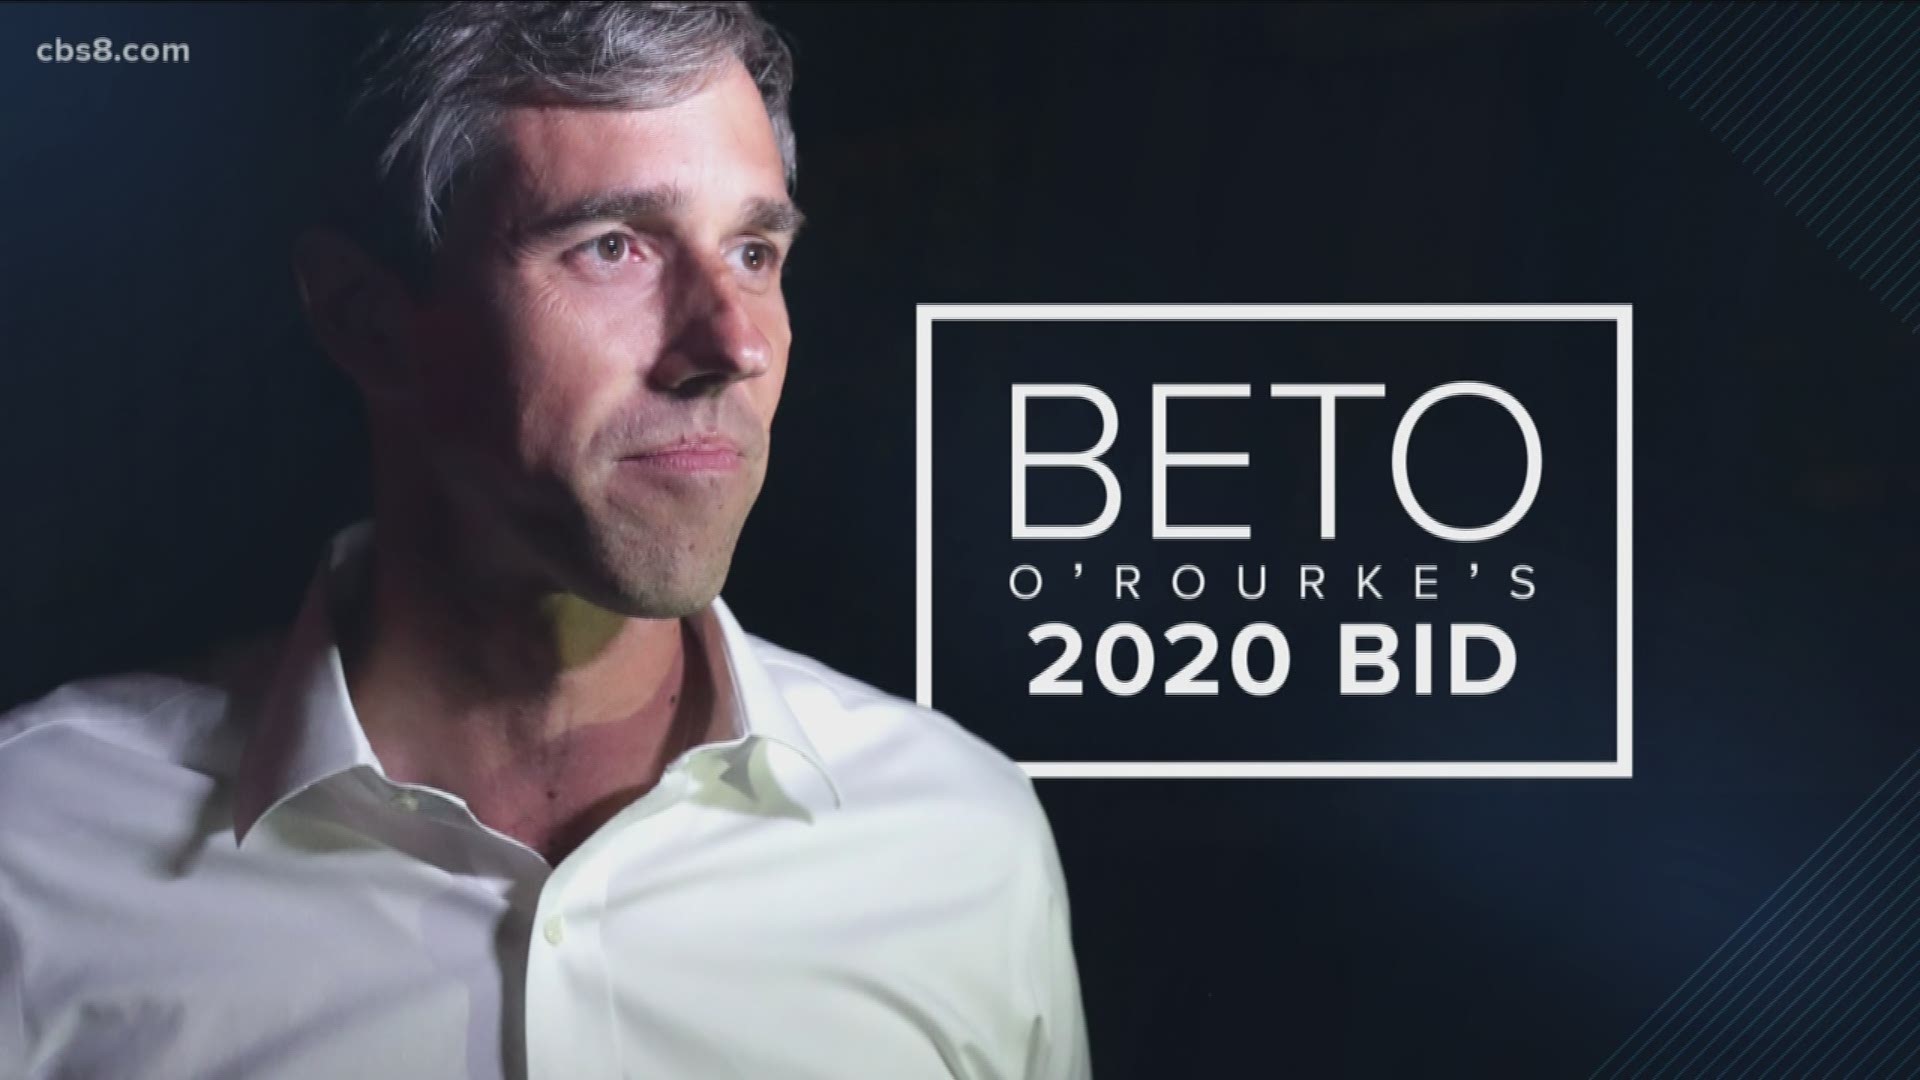 If elected, O'Rourke would be the first president born in the 1970s and the second Roman Catholic, joining John F. Kennedy.